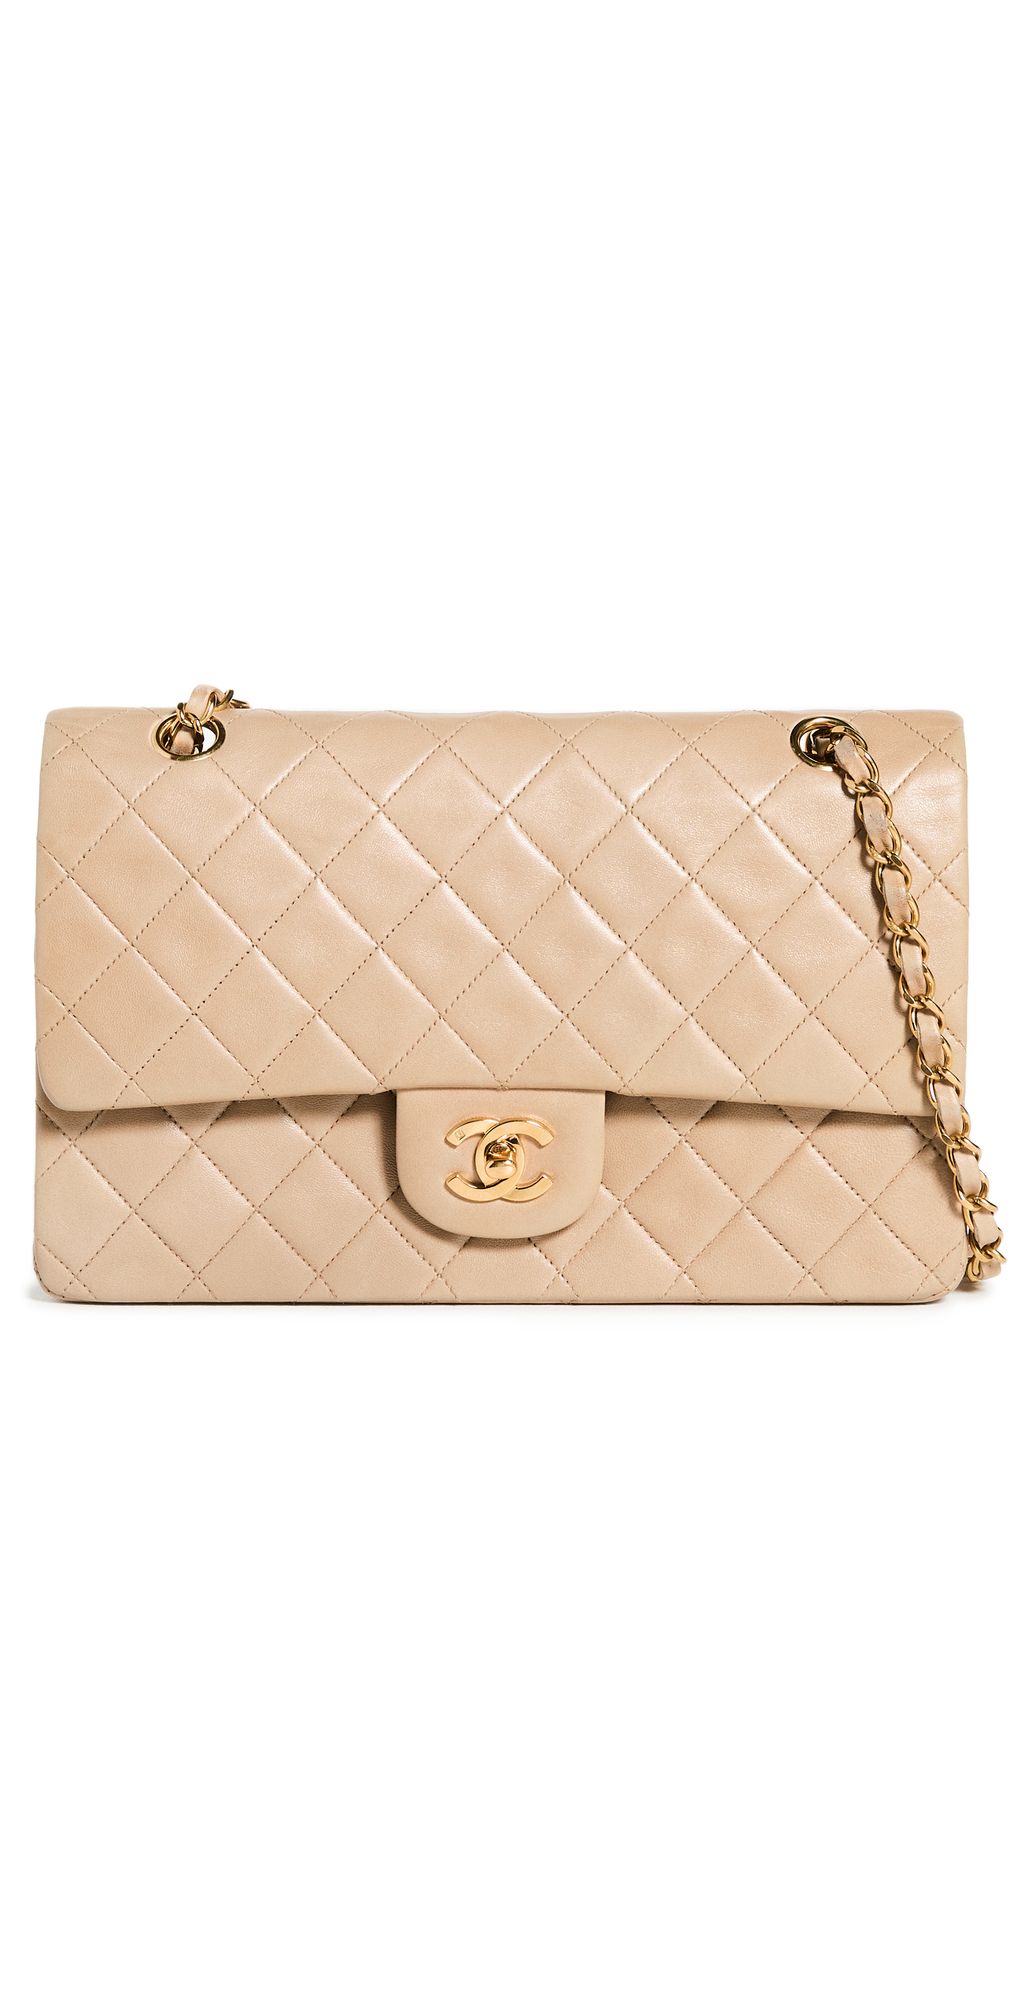 What Goes Around Comes Around Chanel Beige Fold Over Bag | Shopbop